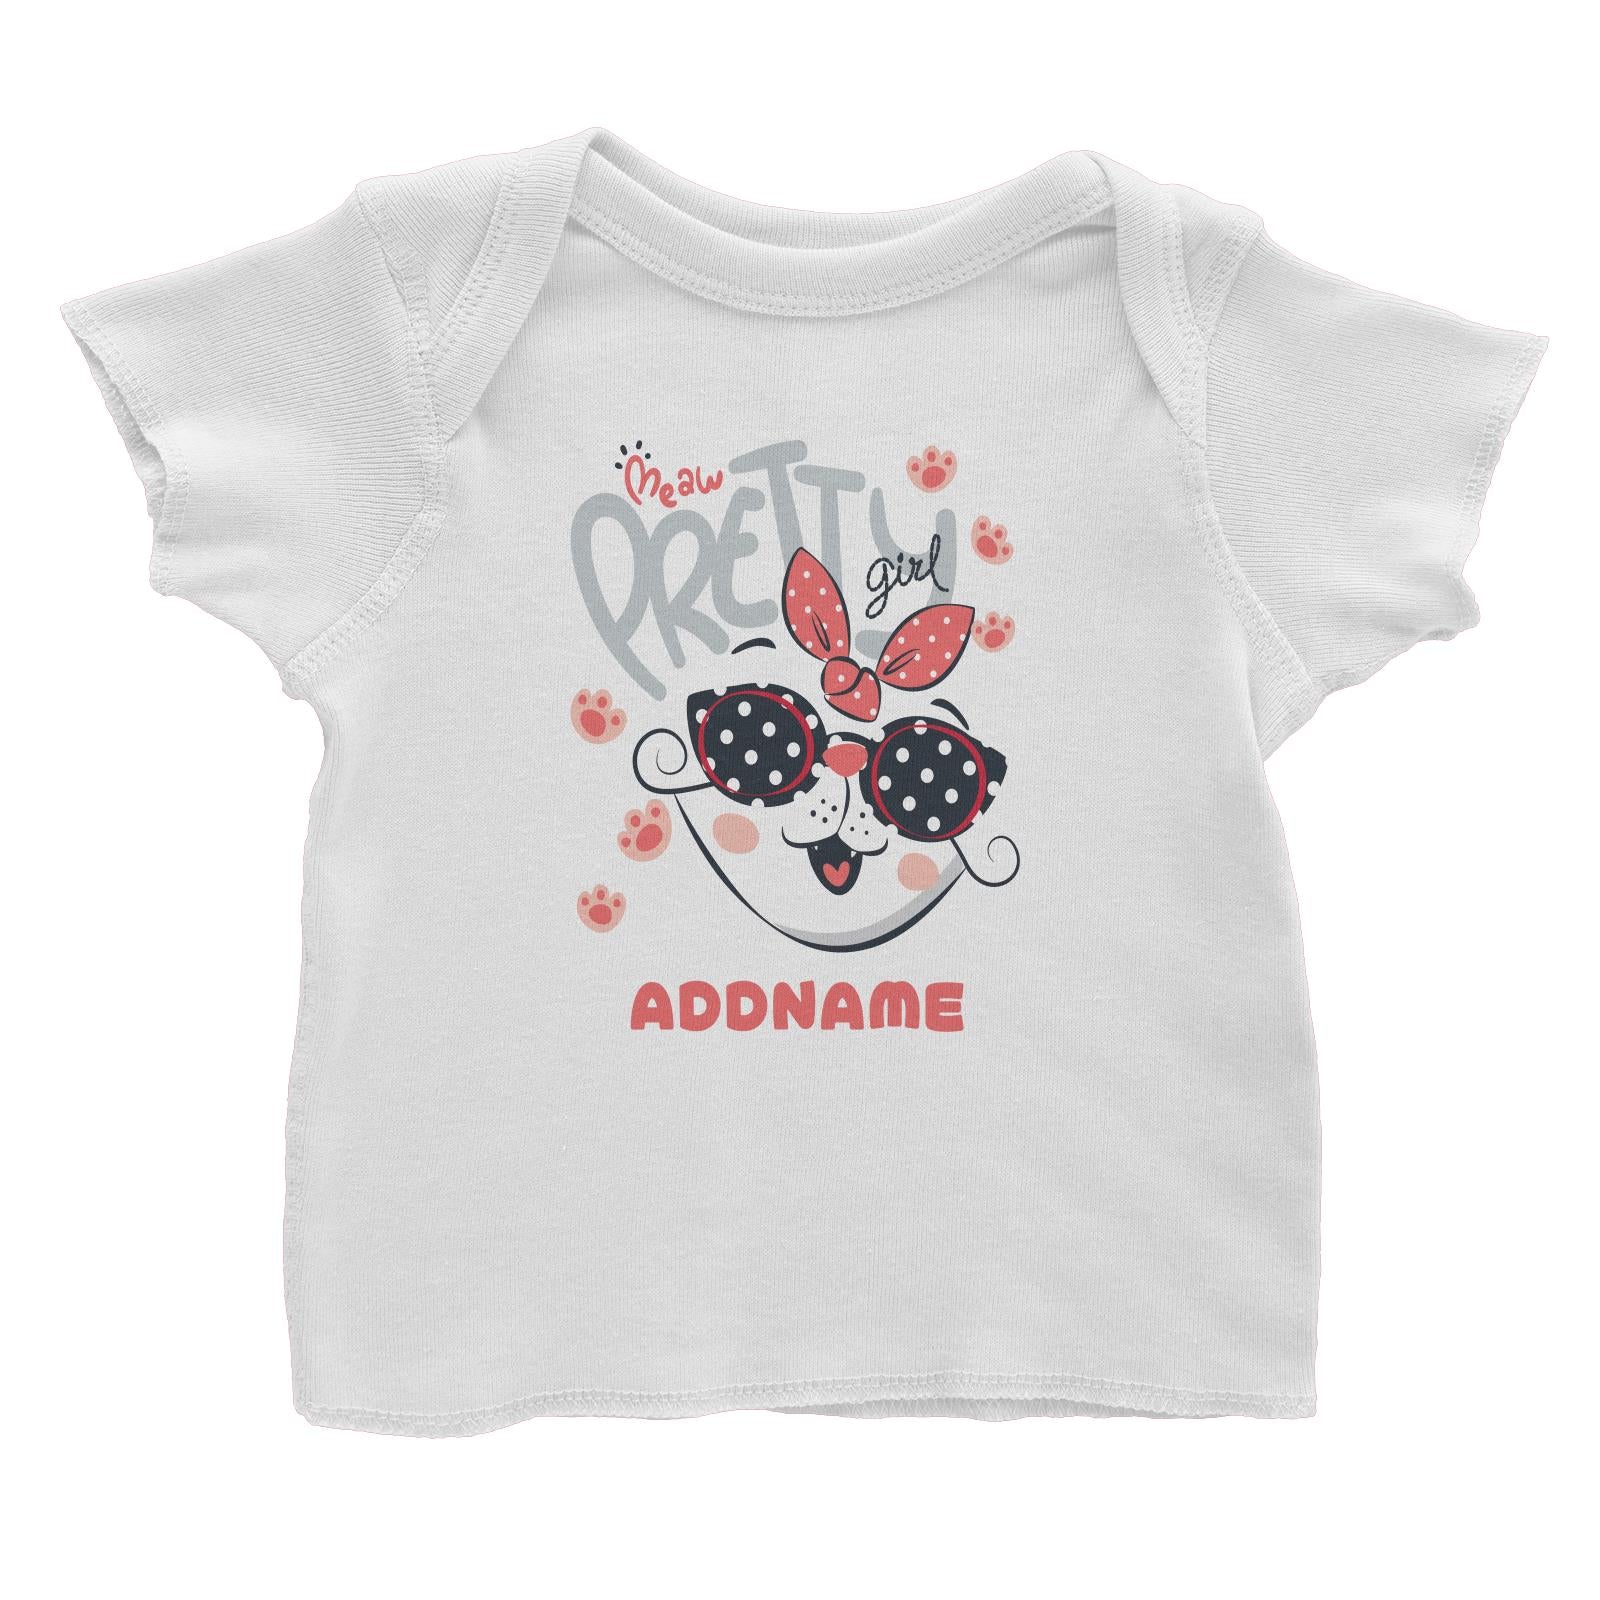 Meaw Pretty Girl Cat Addname White Baby T-Shirt